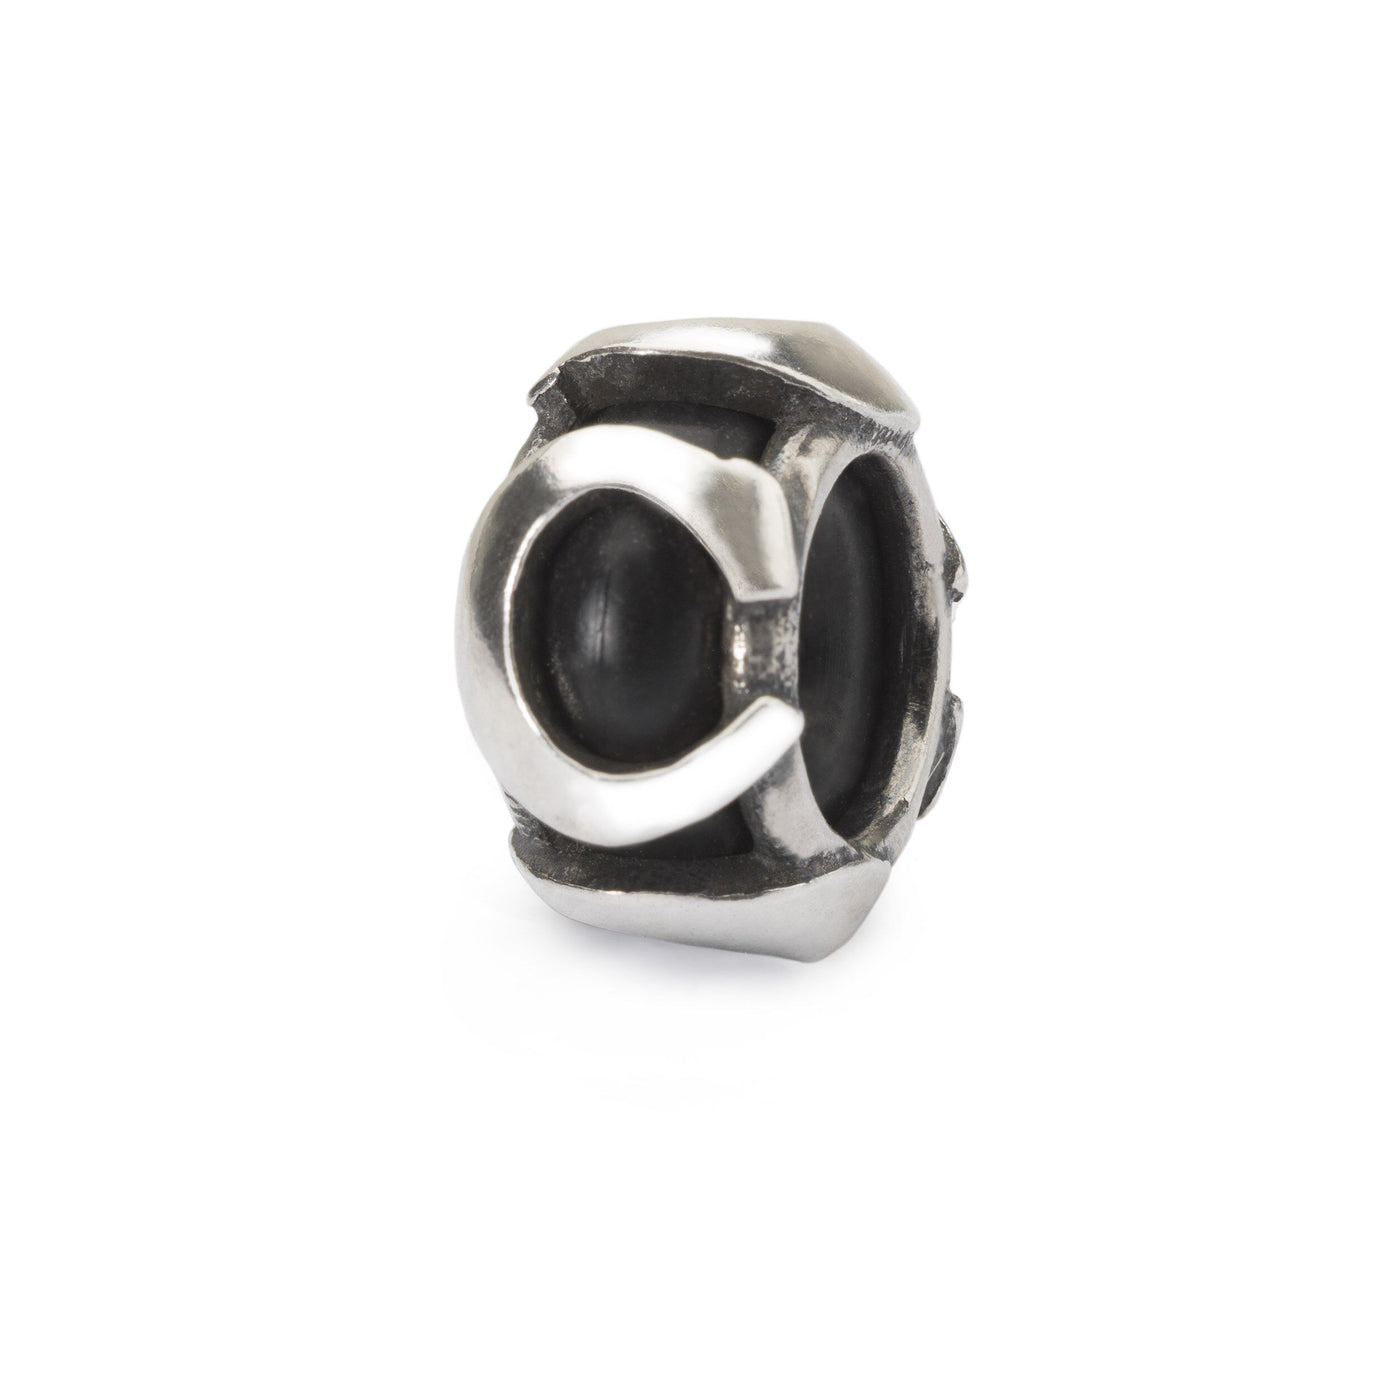 C Spacer - Trollbeads Canada